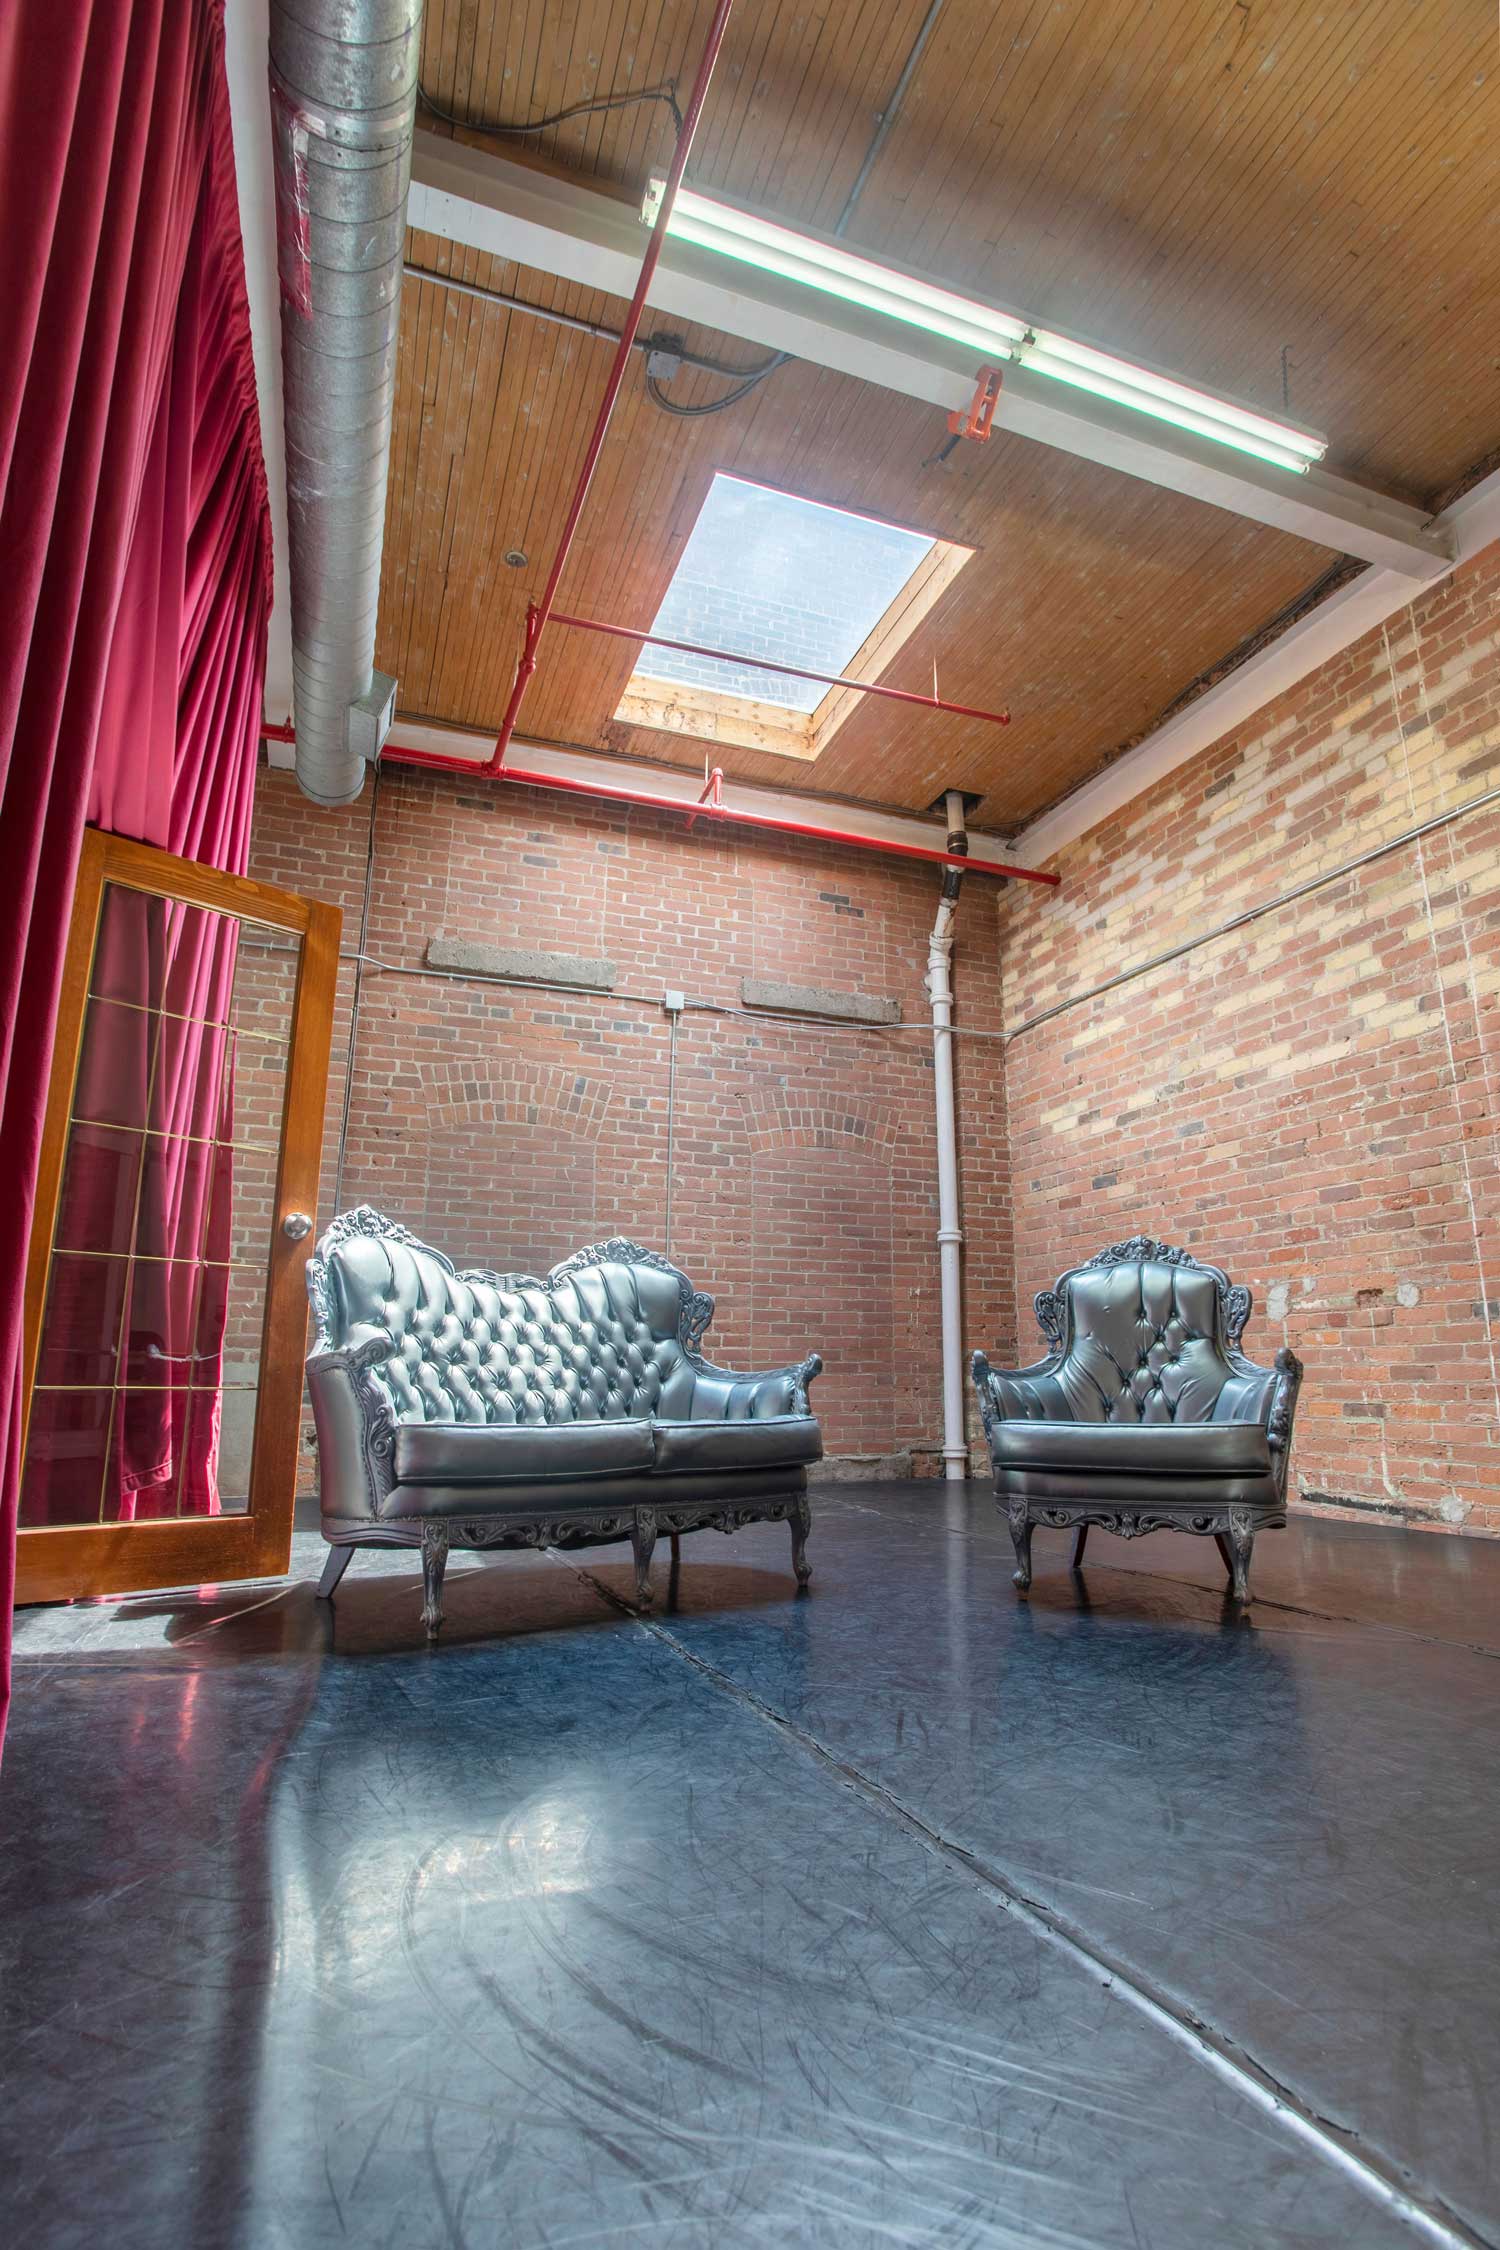 Toronto event space and venue rental for parties, corporate events, meetings